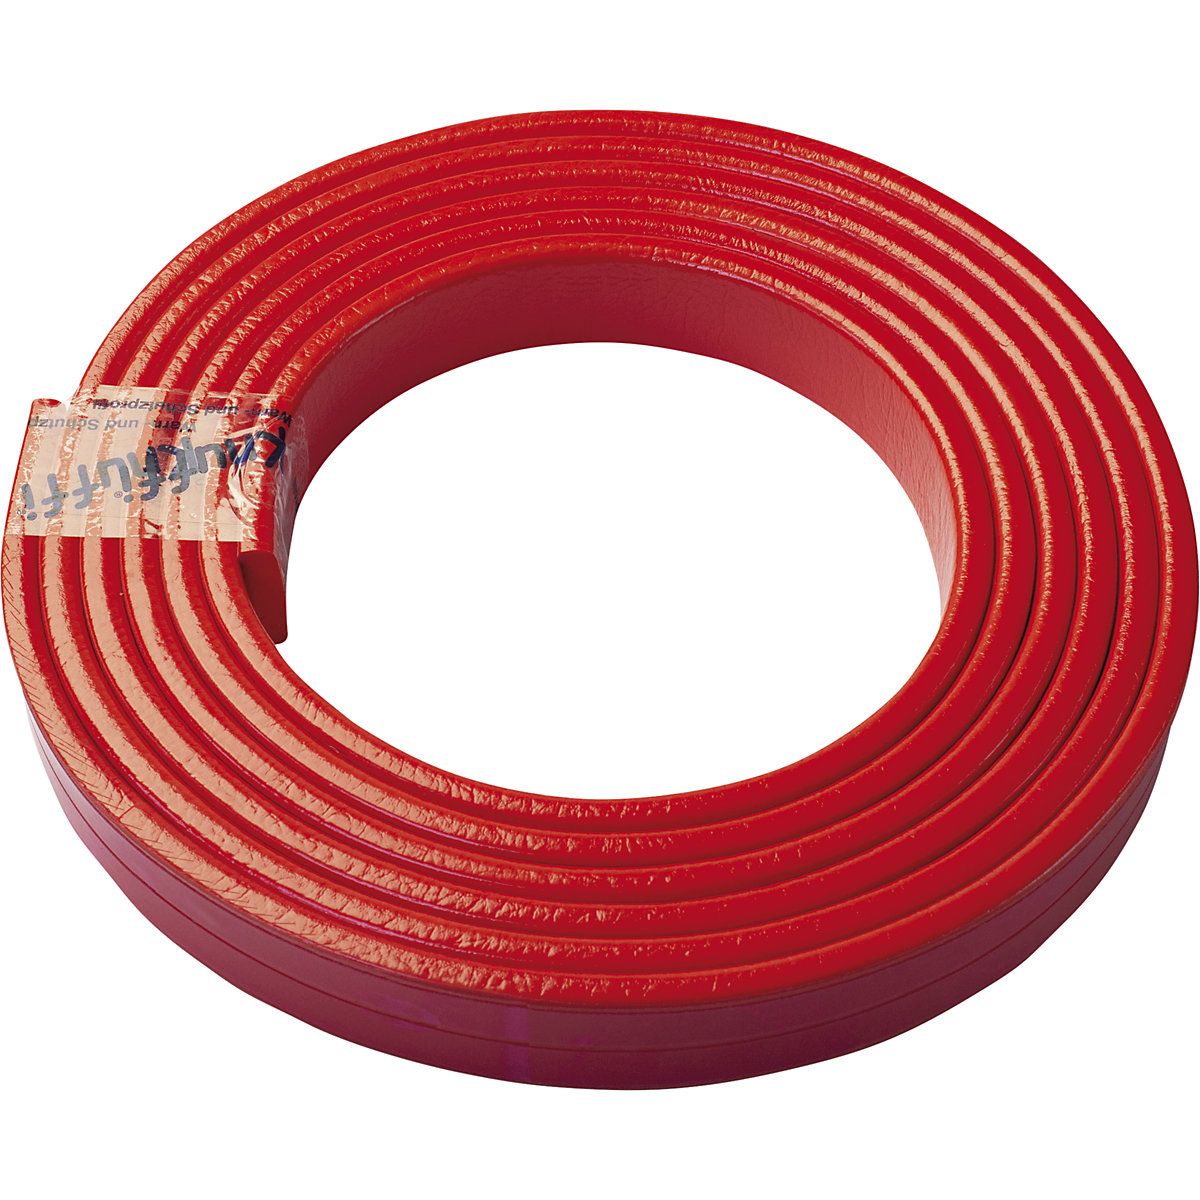 Knuffi® surface protection – SHG, type F, 1 x 5 m roll, red-21